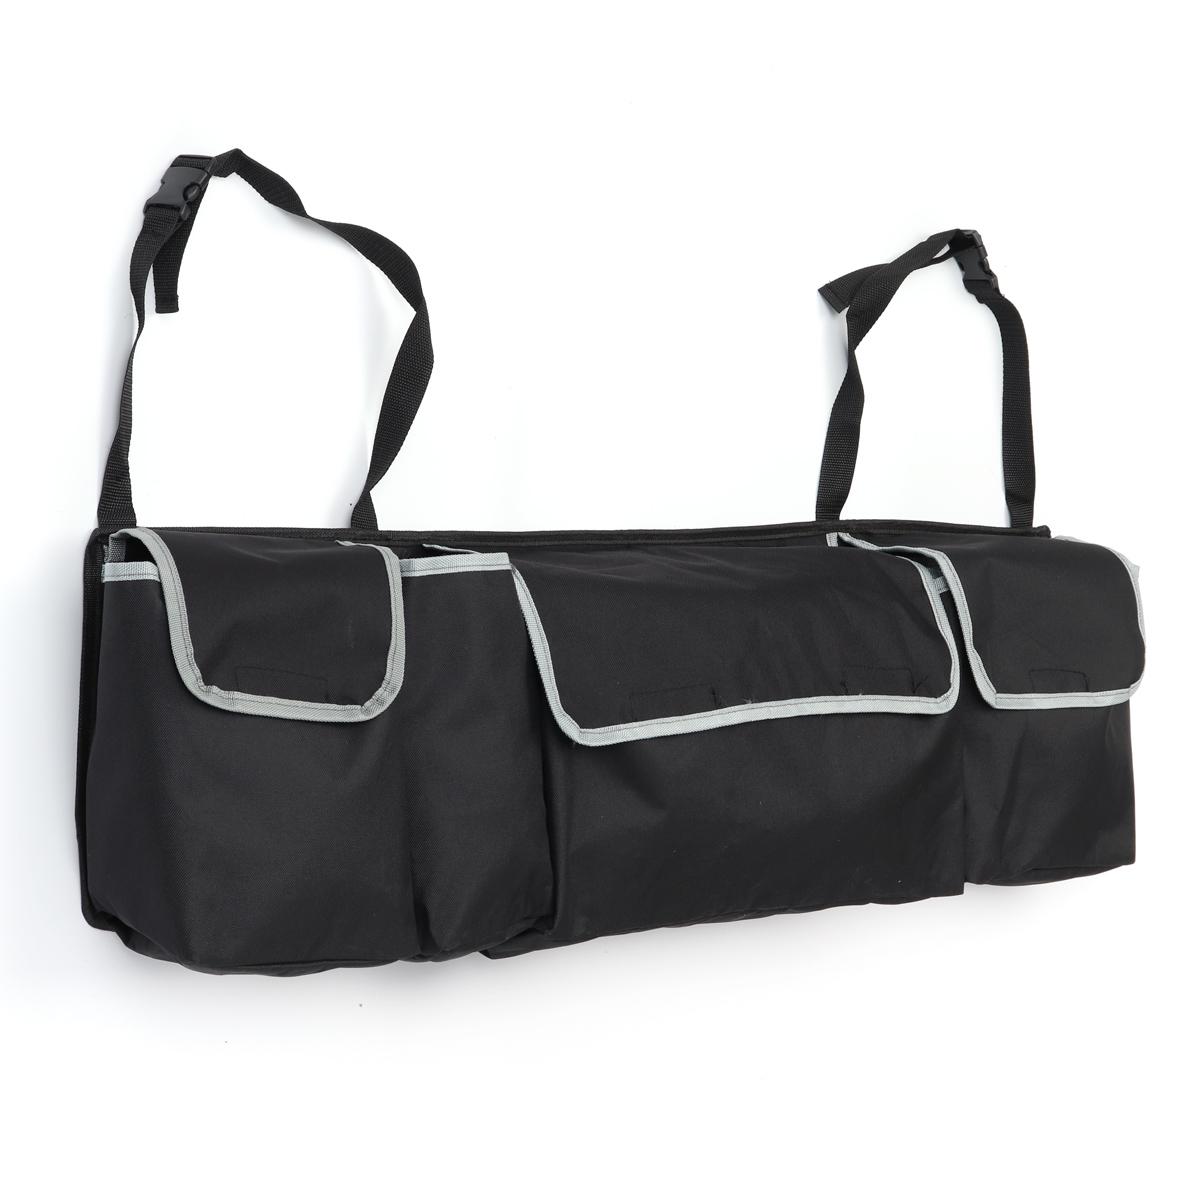 Outdoor-Travel-Car-Seat-Back-Storage-Bag-Hanging-Pack-Pouch-Rear-Trunk-Organizer-1434516-1